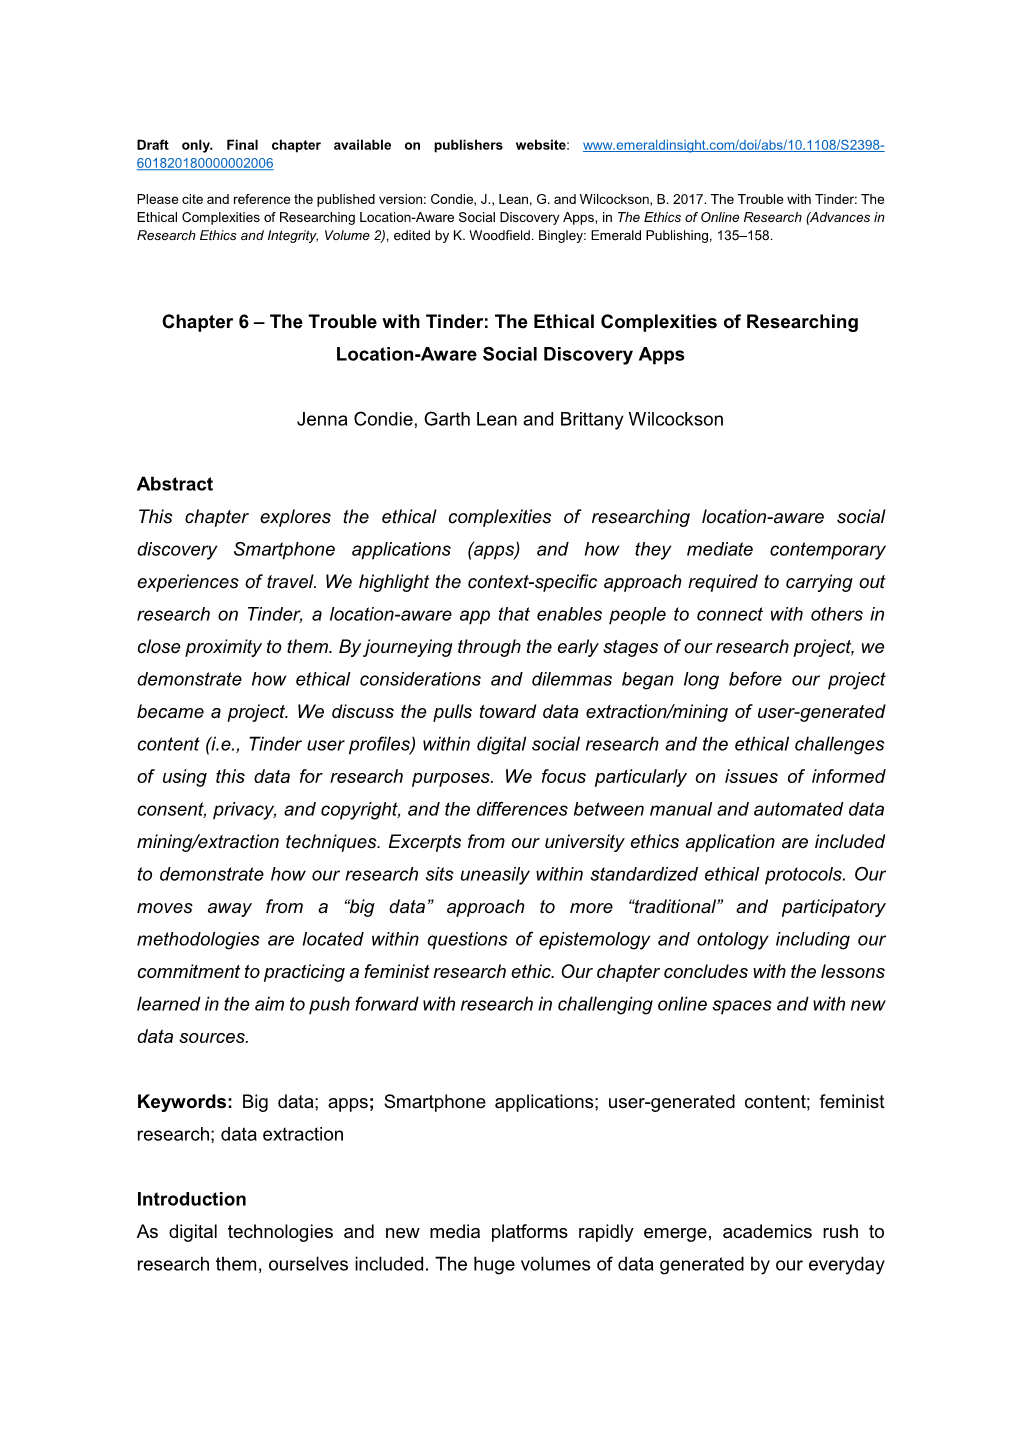 Chapter 6 – the Trouble with Tinder: the Ethical Complexities of Researching Location-Aware Social Discovery Apps